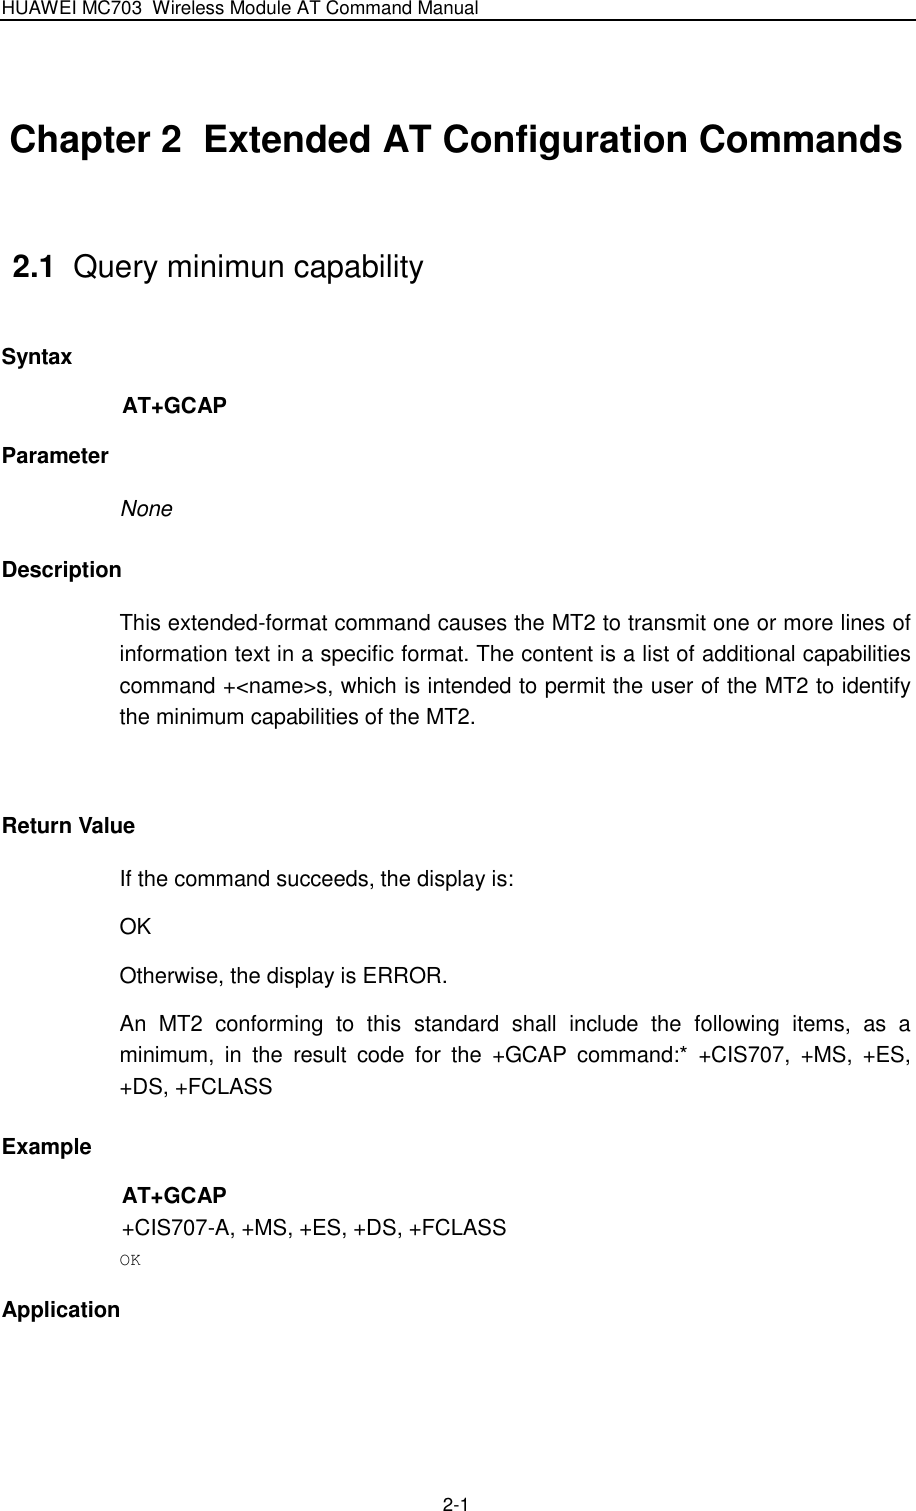 HUAWEI MC703 Wireless Module AT Command Manual   2-1 Chapter 2  Extended AT Configuration Commands                               2.1  Query minimun capability Syntax AT+GCAP Parameter None Description This extended-format command causes the MT2 to transmit one or more lines of information text in a specific format. The content is a list of additional capabilities command +&lt;name&gt;s, which is intended to permit the user of the MT2 to identify the minimum capabilities of the MT2.  Return Value If the command succeeds, the display is: OK Otherwise, the display is ERROR. An  MT2  conforming  to  this  standard  shall  include  the  following  items,  as  a minimum,  in  the  result  code  for  the  +GCAP  command:*  +CIS707,  +MS,  +ES, +DS, +FCLASS Example AT+GCAP +CIS707-A, +MS, +ES, +DS, +FCLASS OK Application  